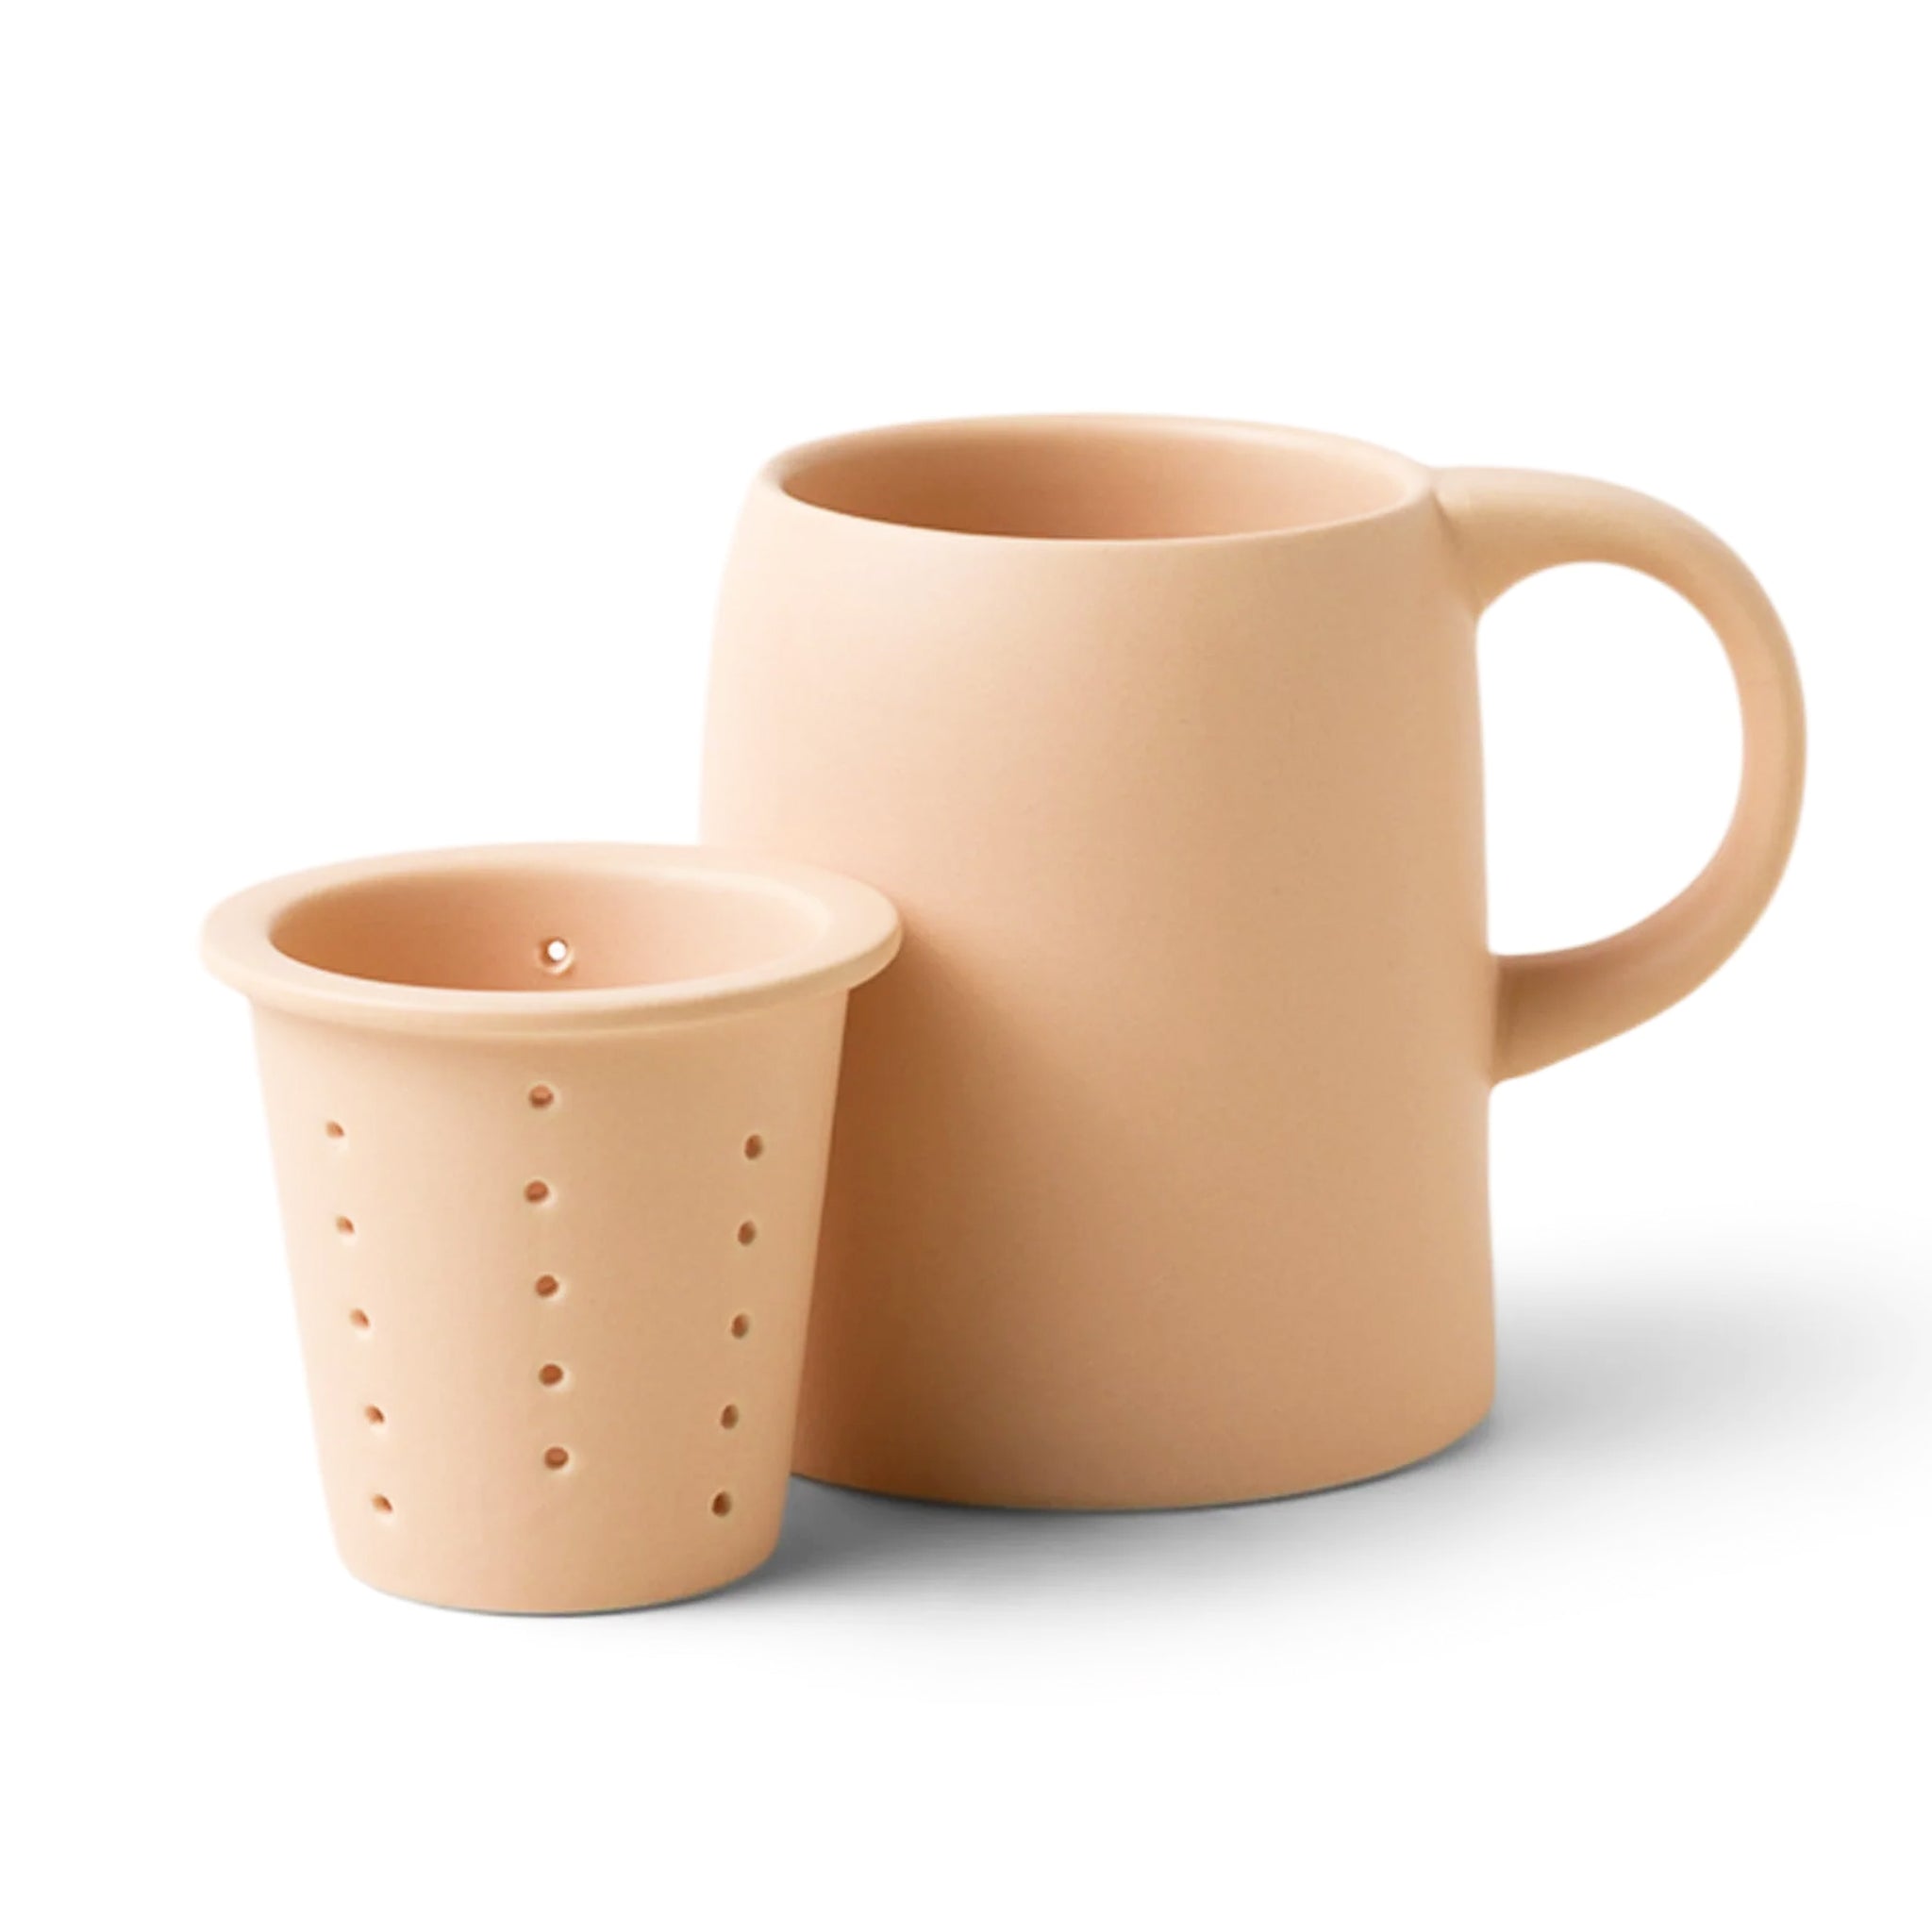 On a white background is a ceramic mug with an infuser cup to insert inside the rim of the mug. 